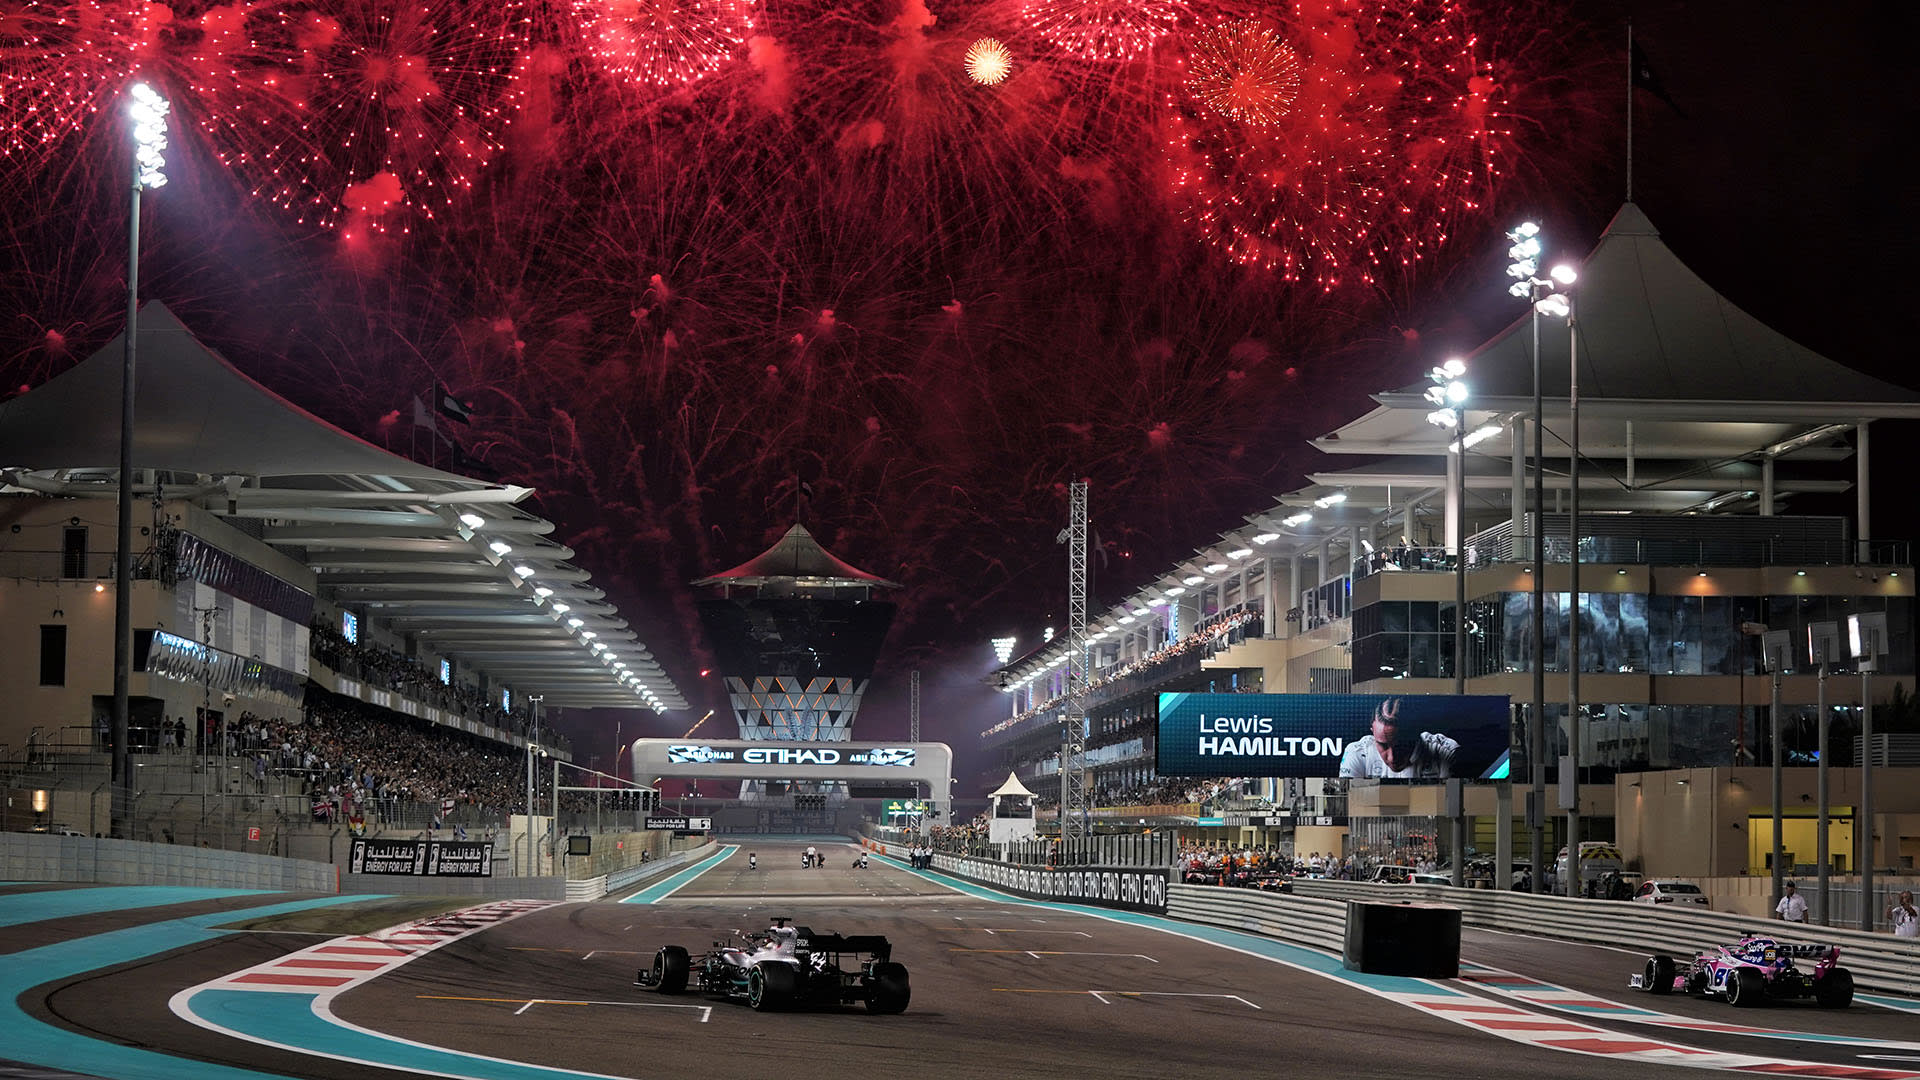 Ross's Abu Dhabi GP review A spectacular finale and a bright future